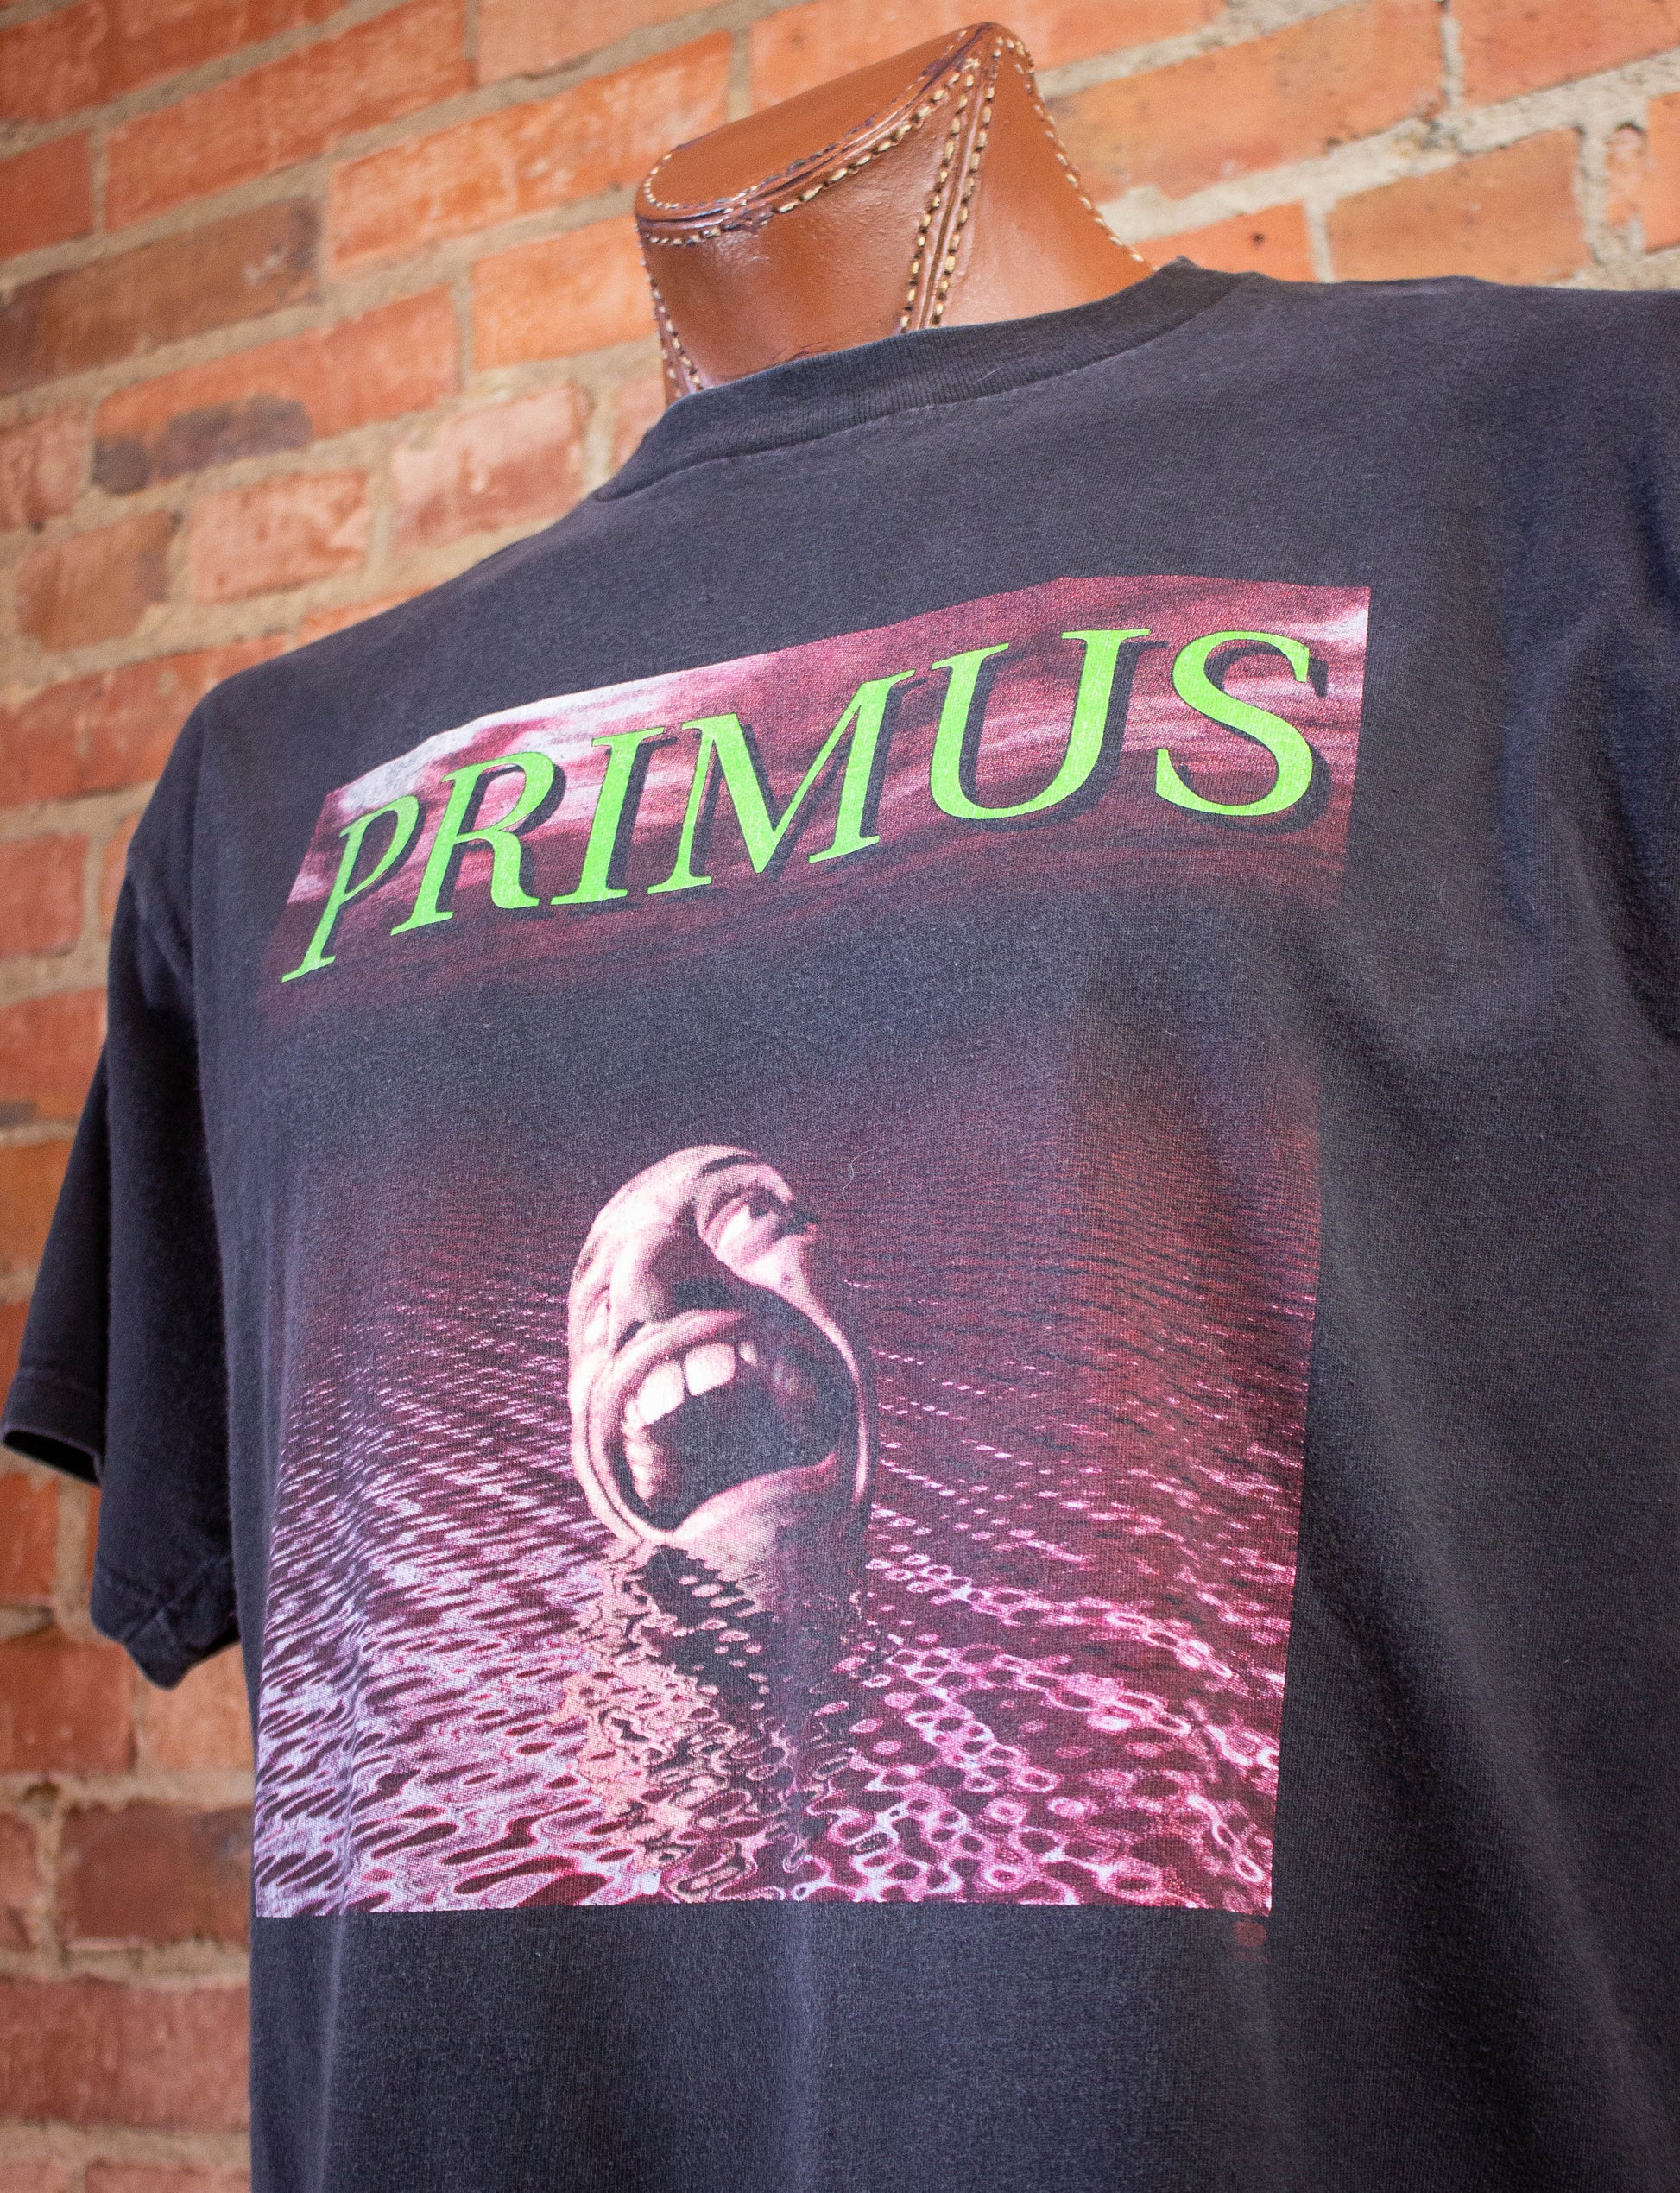 Vintage Primus Tales From The Punchbowl Tour Concert T-Shirt 1995 XL